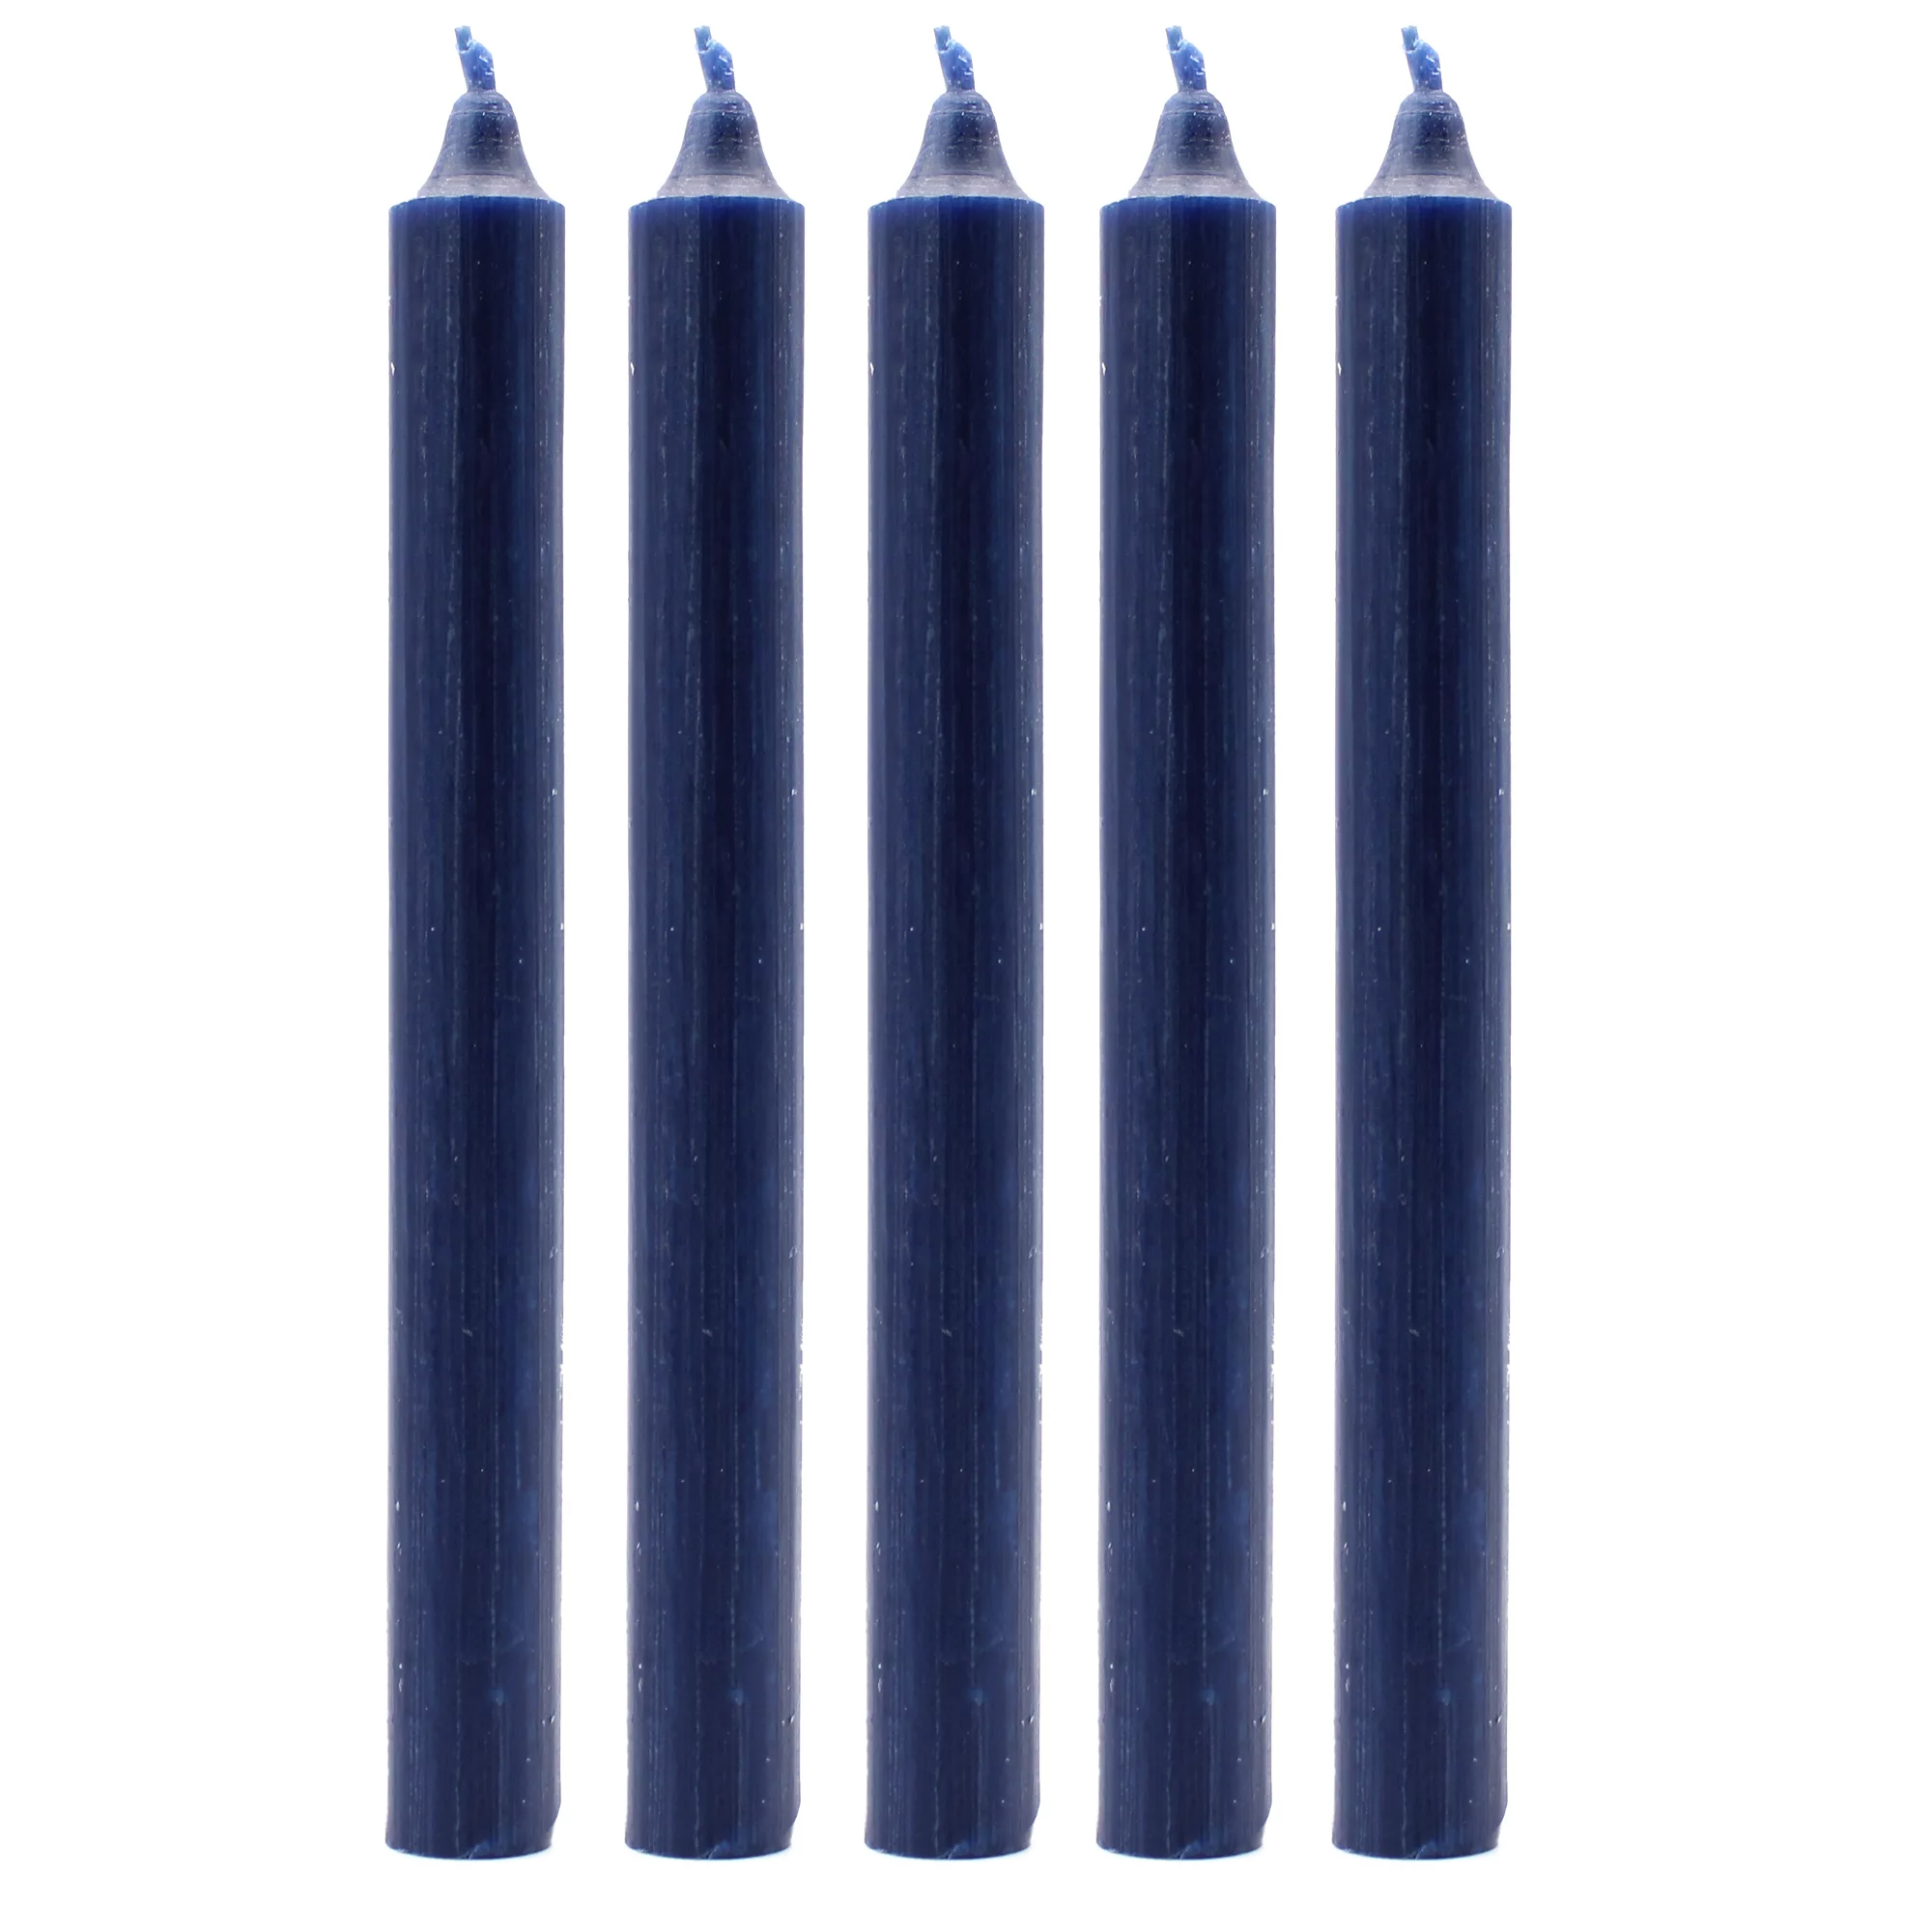 Solid Colour Dinner Candles – Rustic Navy – Pack of 5